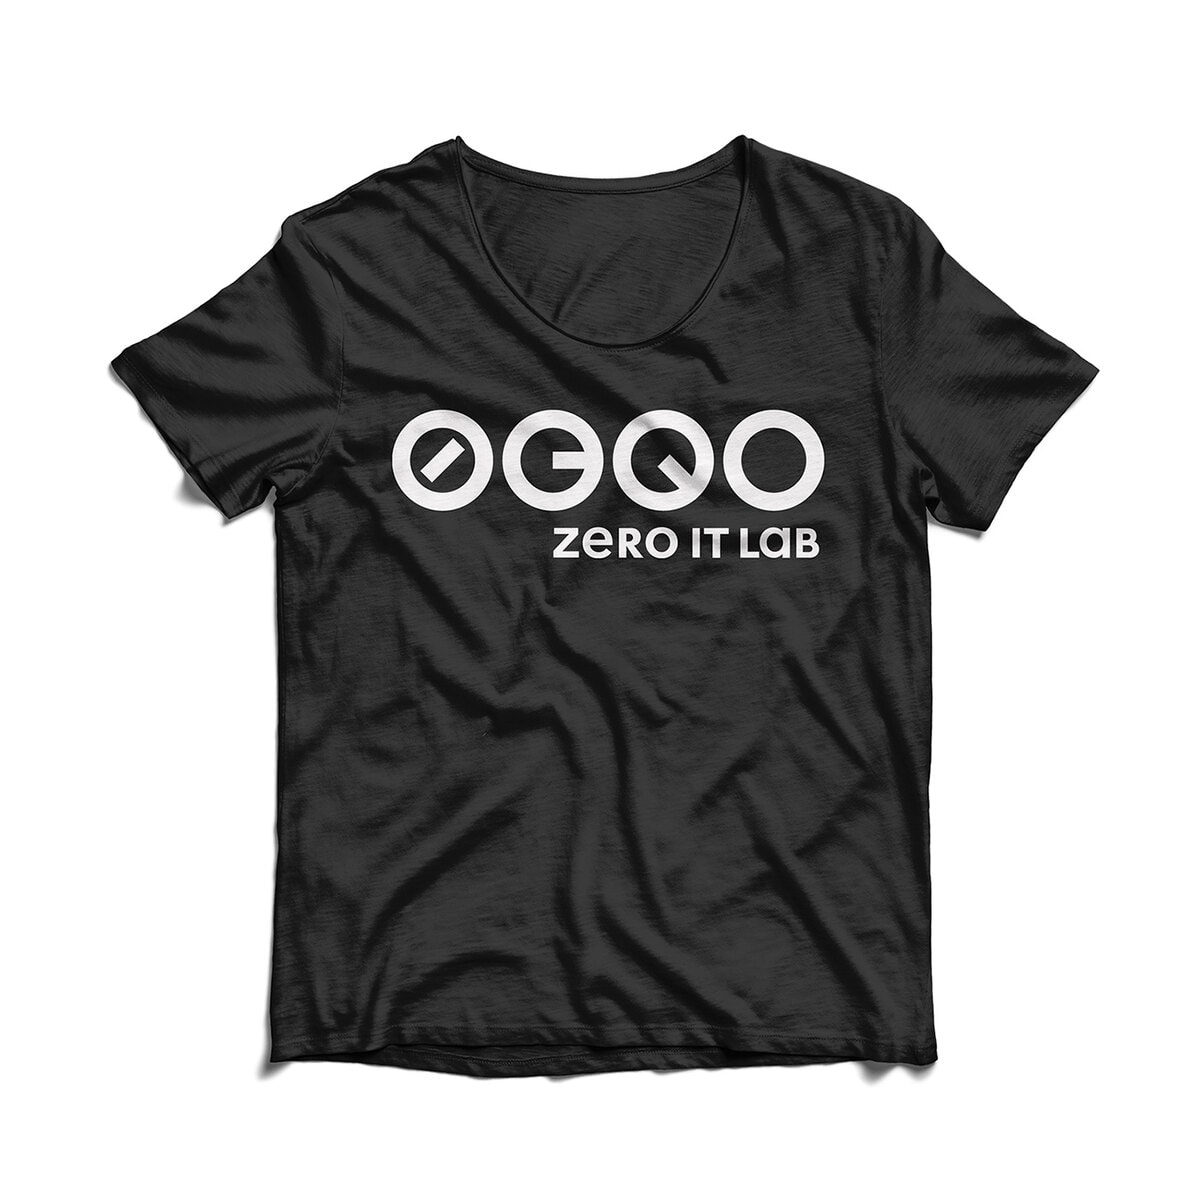 Brand Identity For A Cyber Security And Ethical Hacker Team Called Zero IT Lab